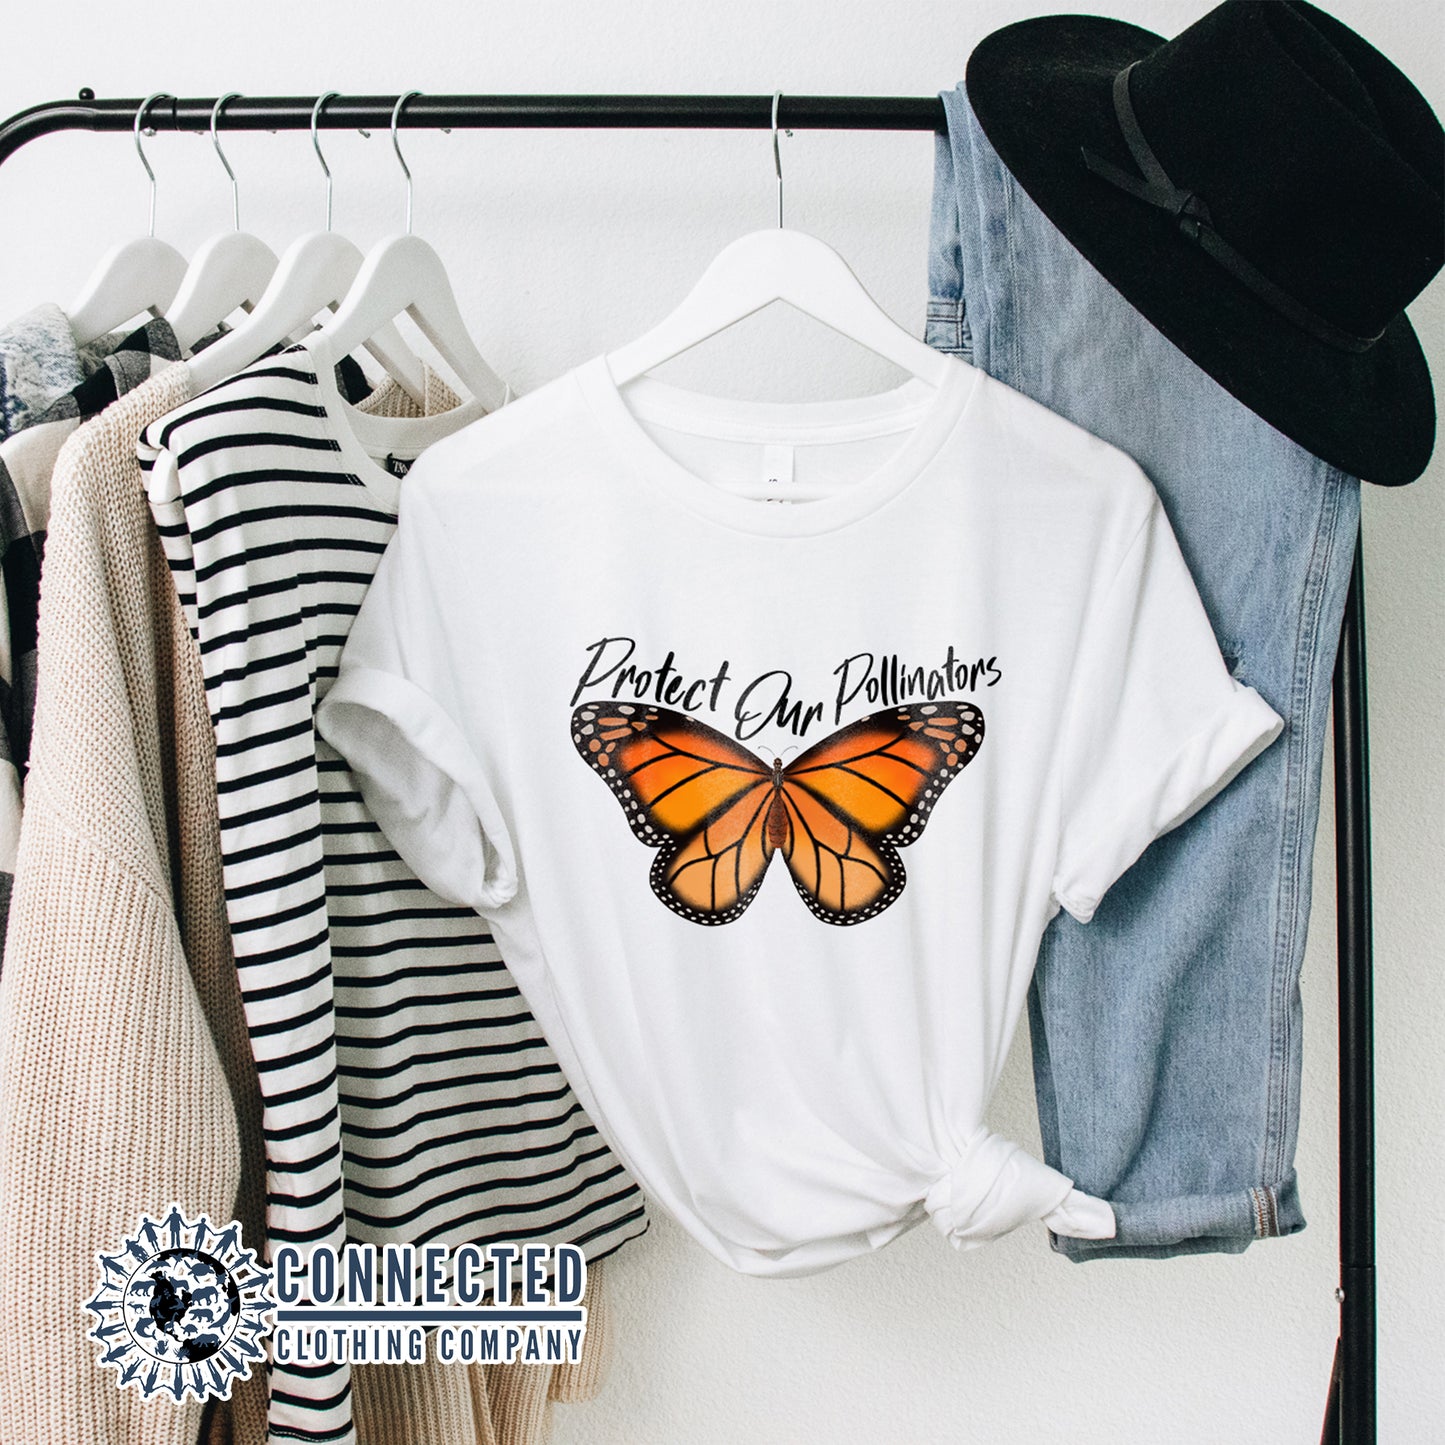 White Protect Our Pollinators Short-Sleeve Tee - Connected Clothing Company - Ethically and Sustainably Made - 10% of profits donated to pollinator and monarch conservation and ocean conservation